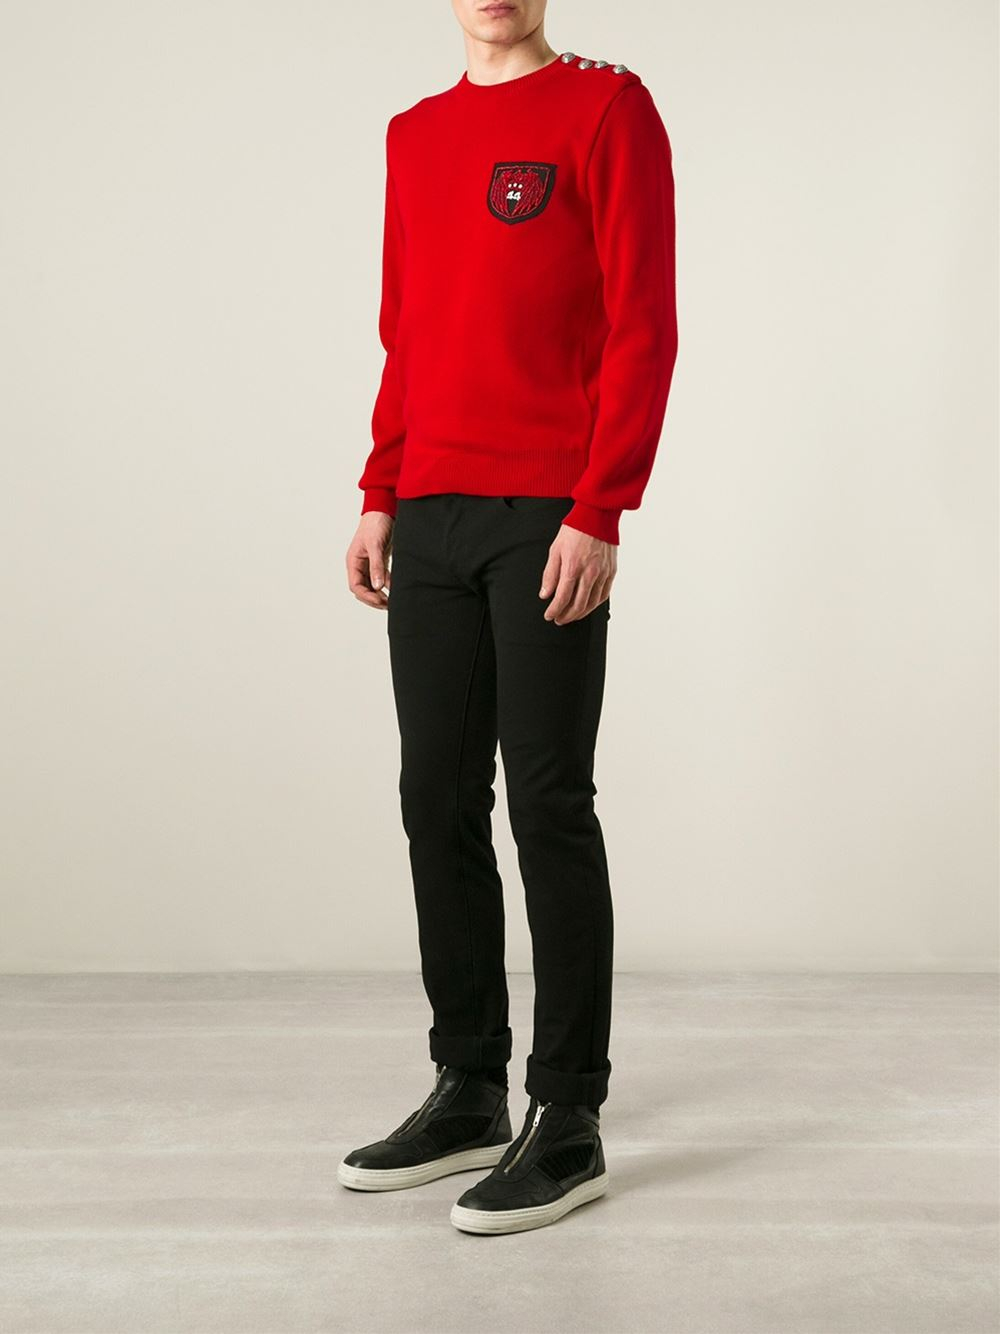 Balmain Button Embellished Sweater in Red for Men | Lyst